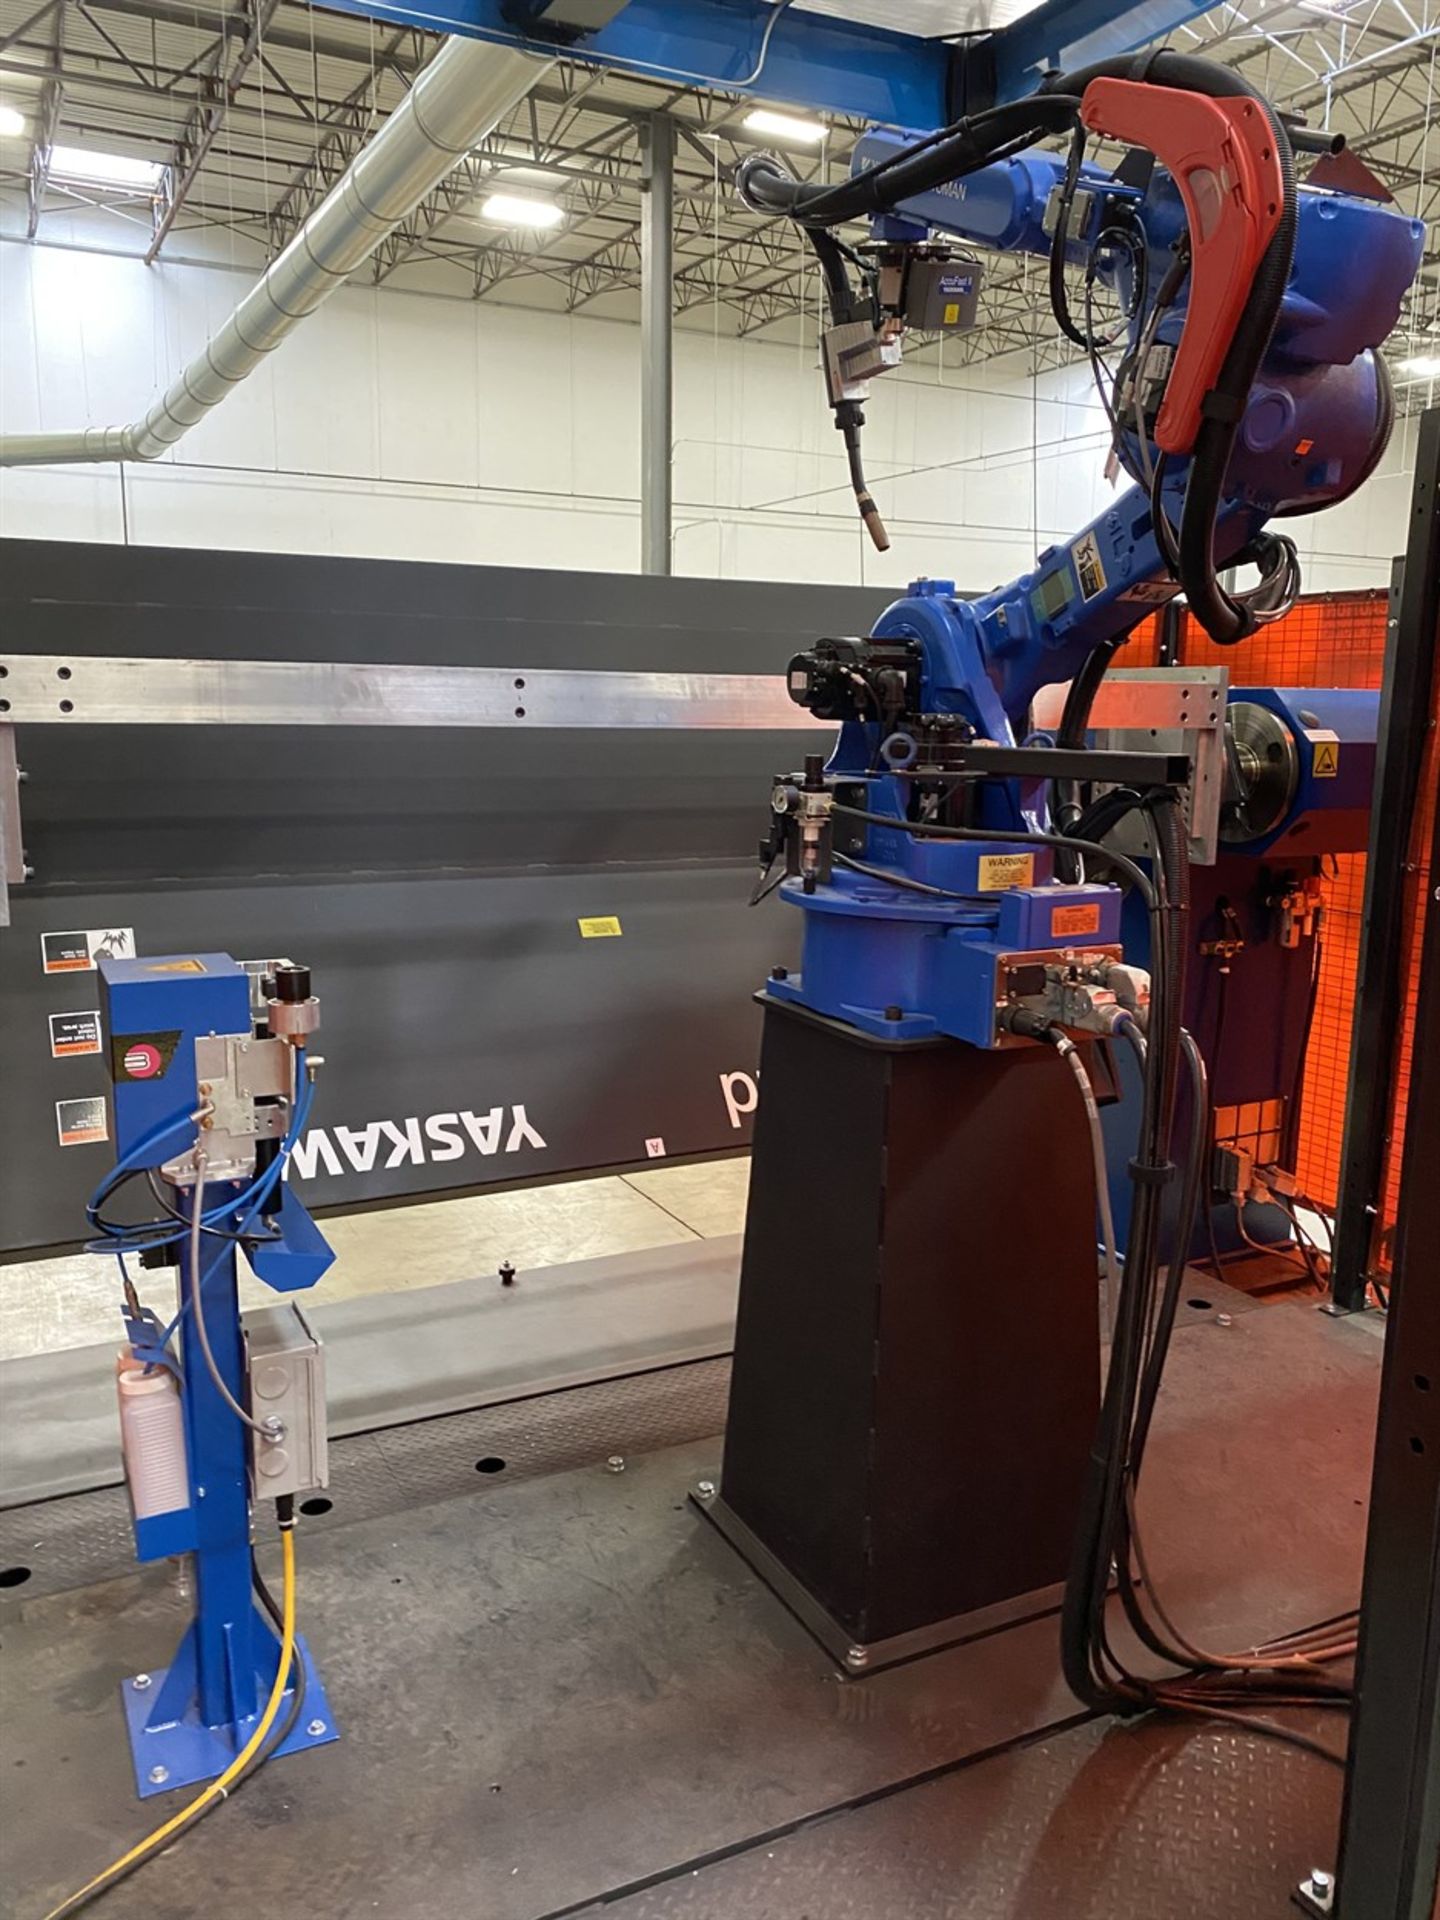 2019 YASKAWA MOTOMAN HP20D Robotic Welding Cell, s/n RH9G00-2703-5, 20 Kg Payload, 6-Axis, 120.6” - Image 4 of 10